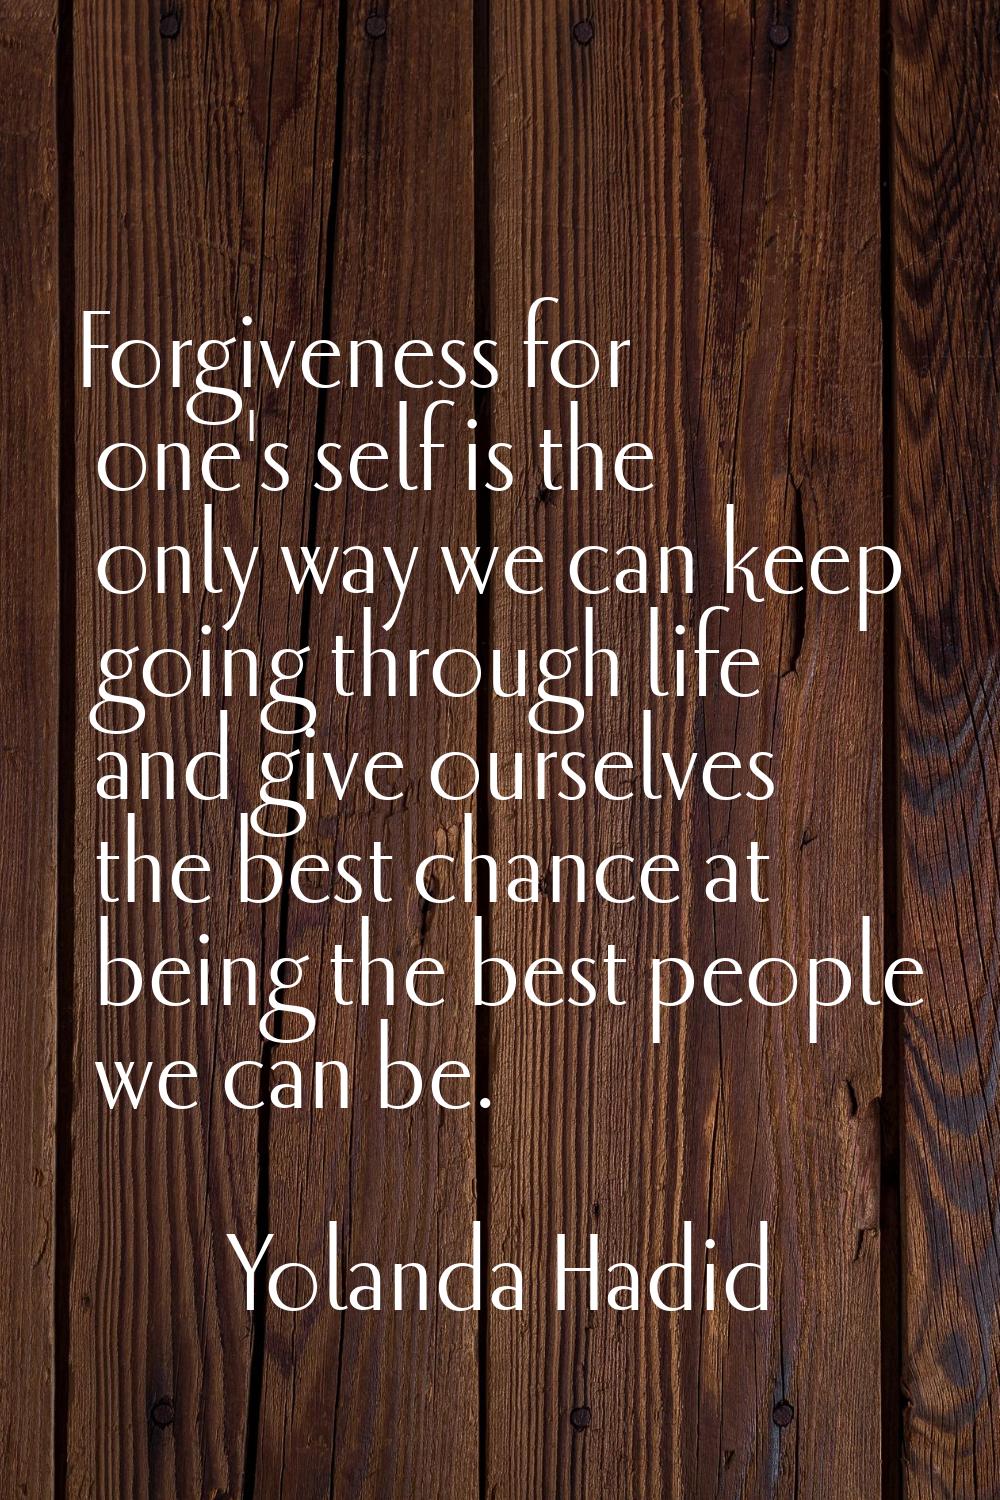 Forgiveness for one's self is the only way we can keep going through life and give ourselves the be